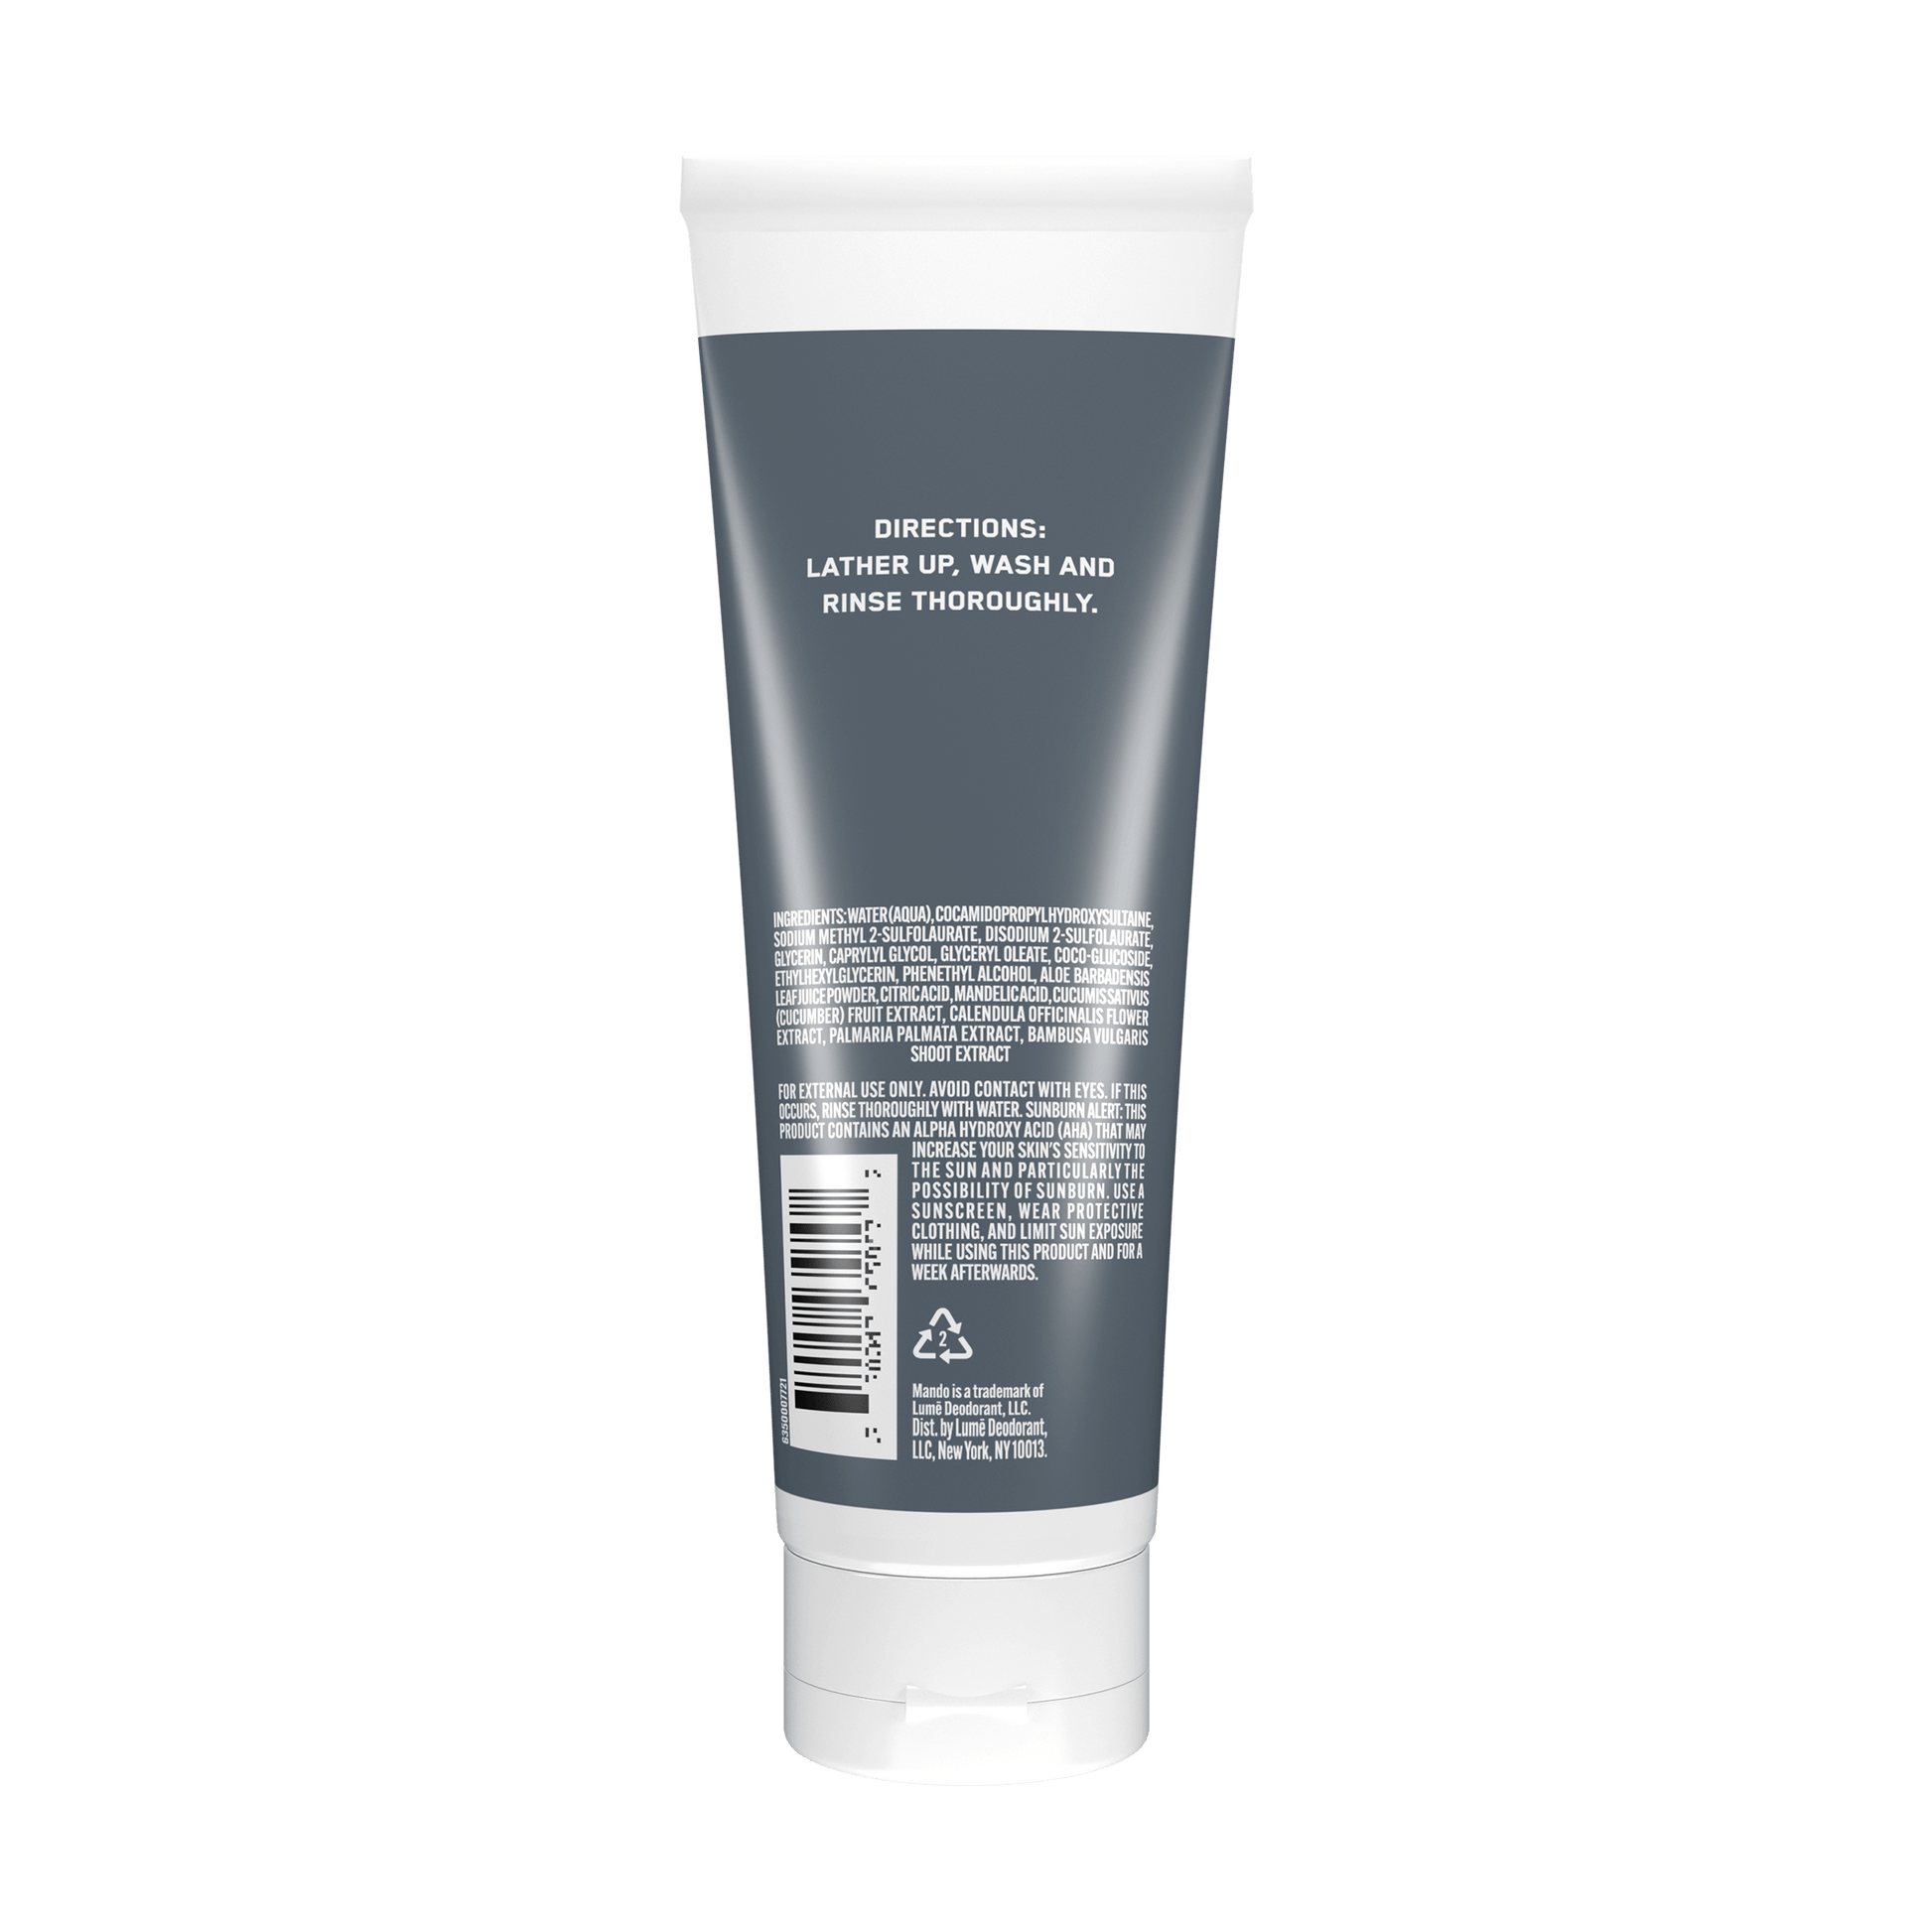 grey tube of Mando body wash in Unscented with description text 